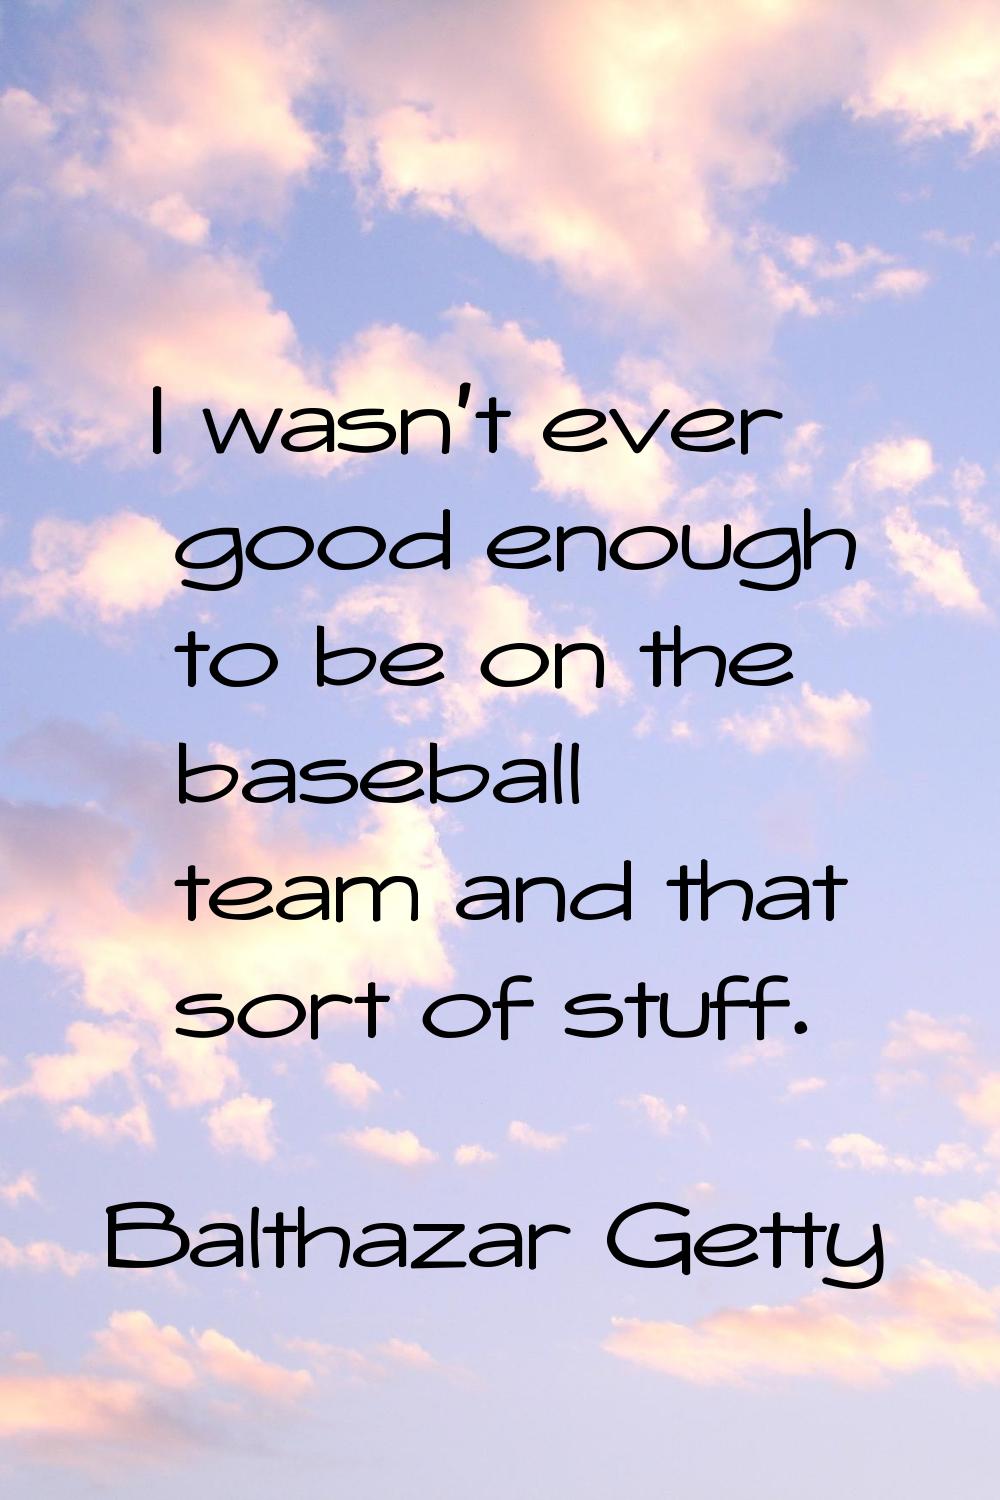 I wasn't ever good enough to be on the baseball team and that sort of stuff.